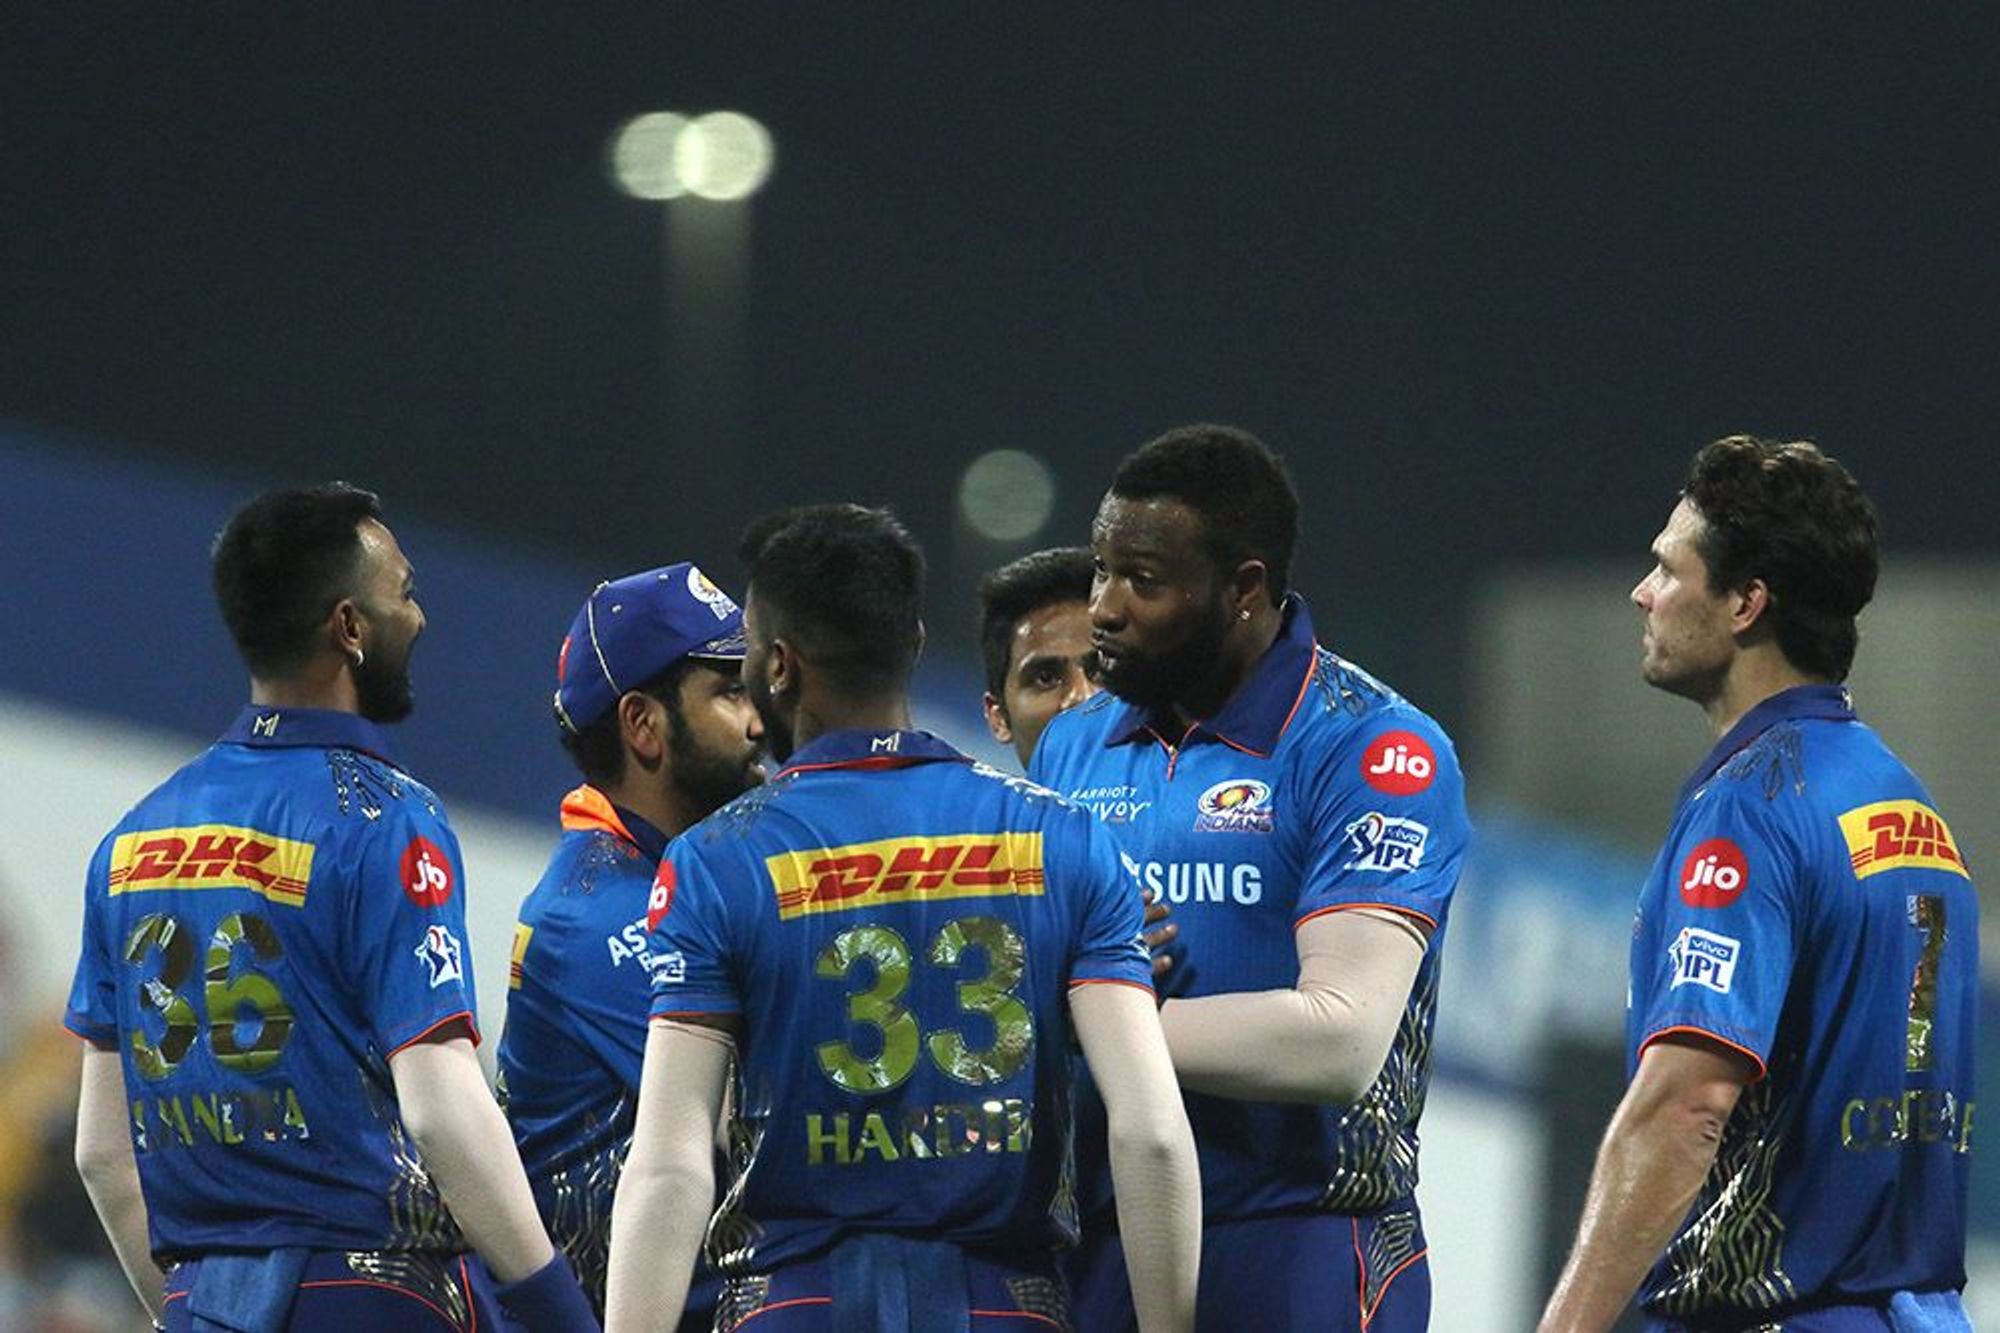 MI returned to fifth spot on the points table | BCCI/IPL